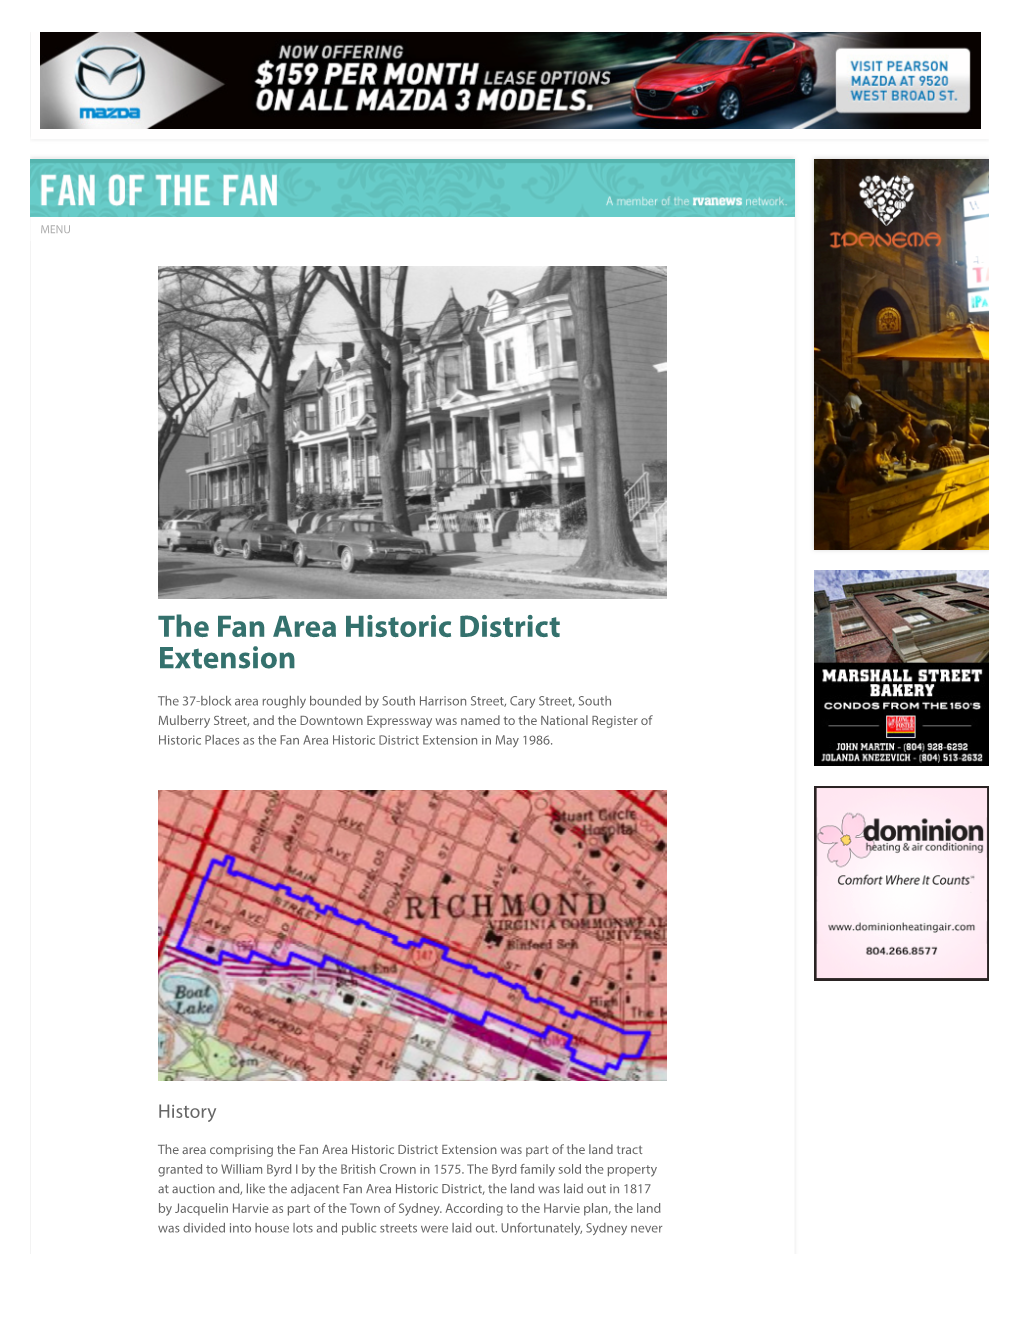 The Fan Area Historic District Extension